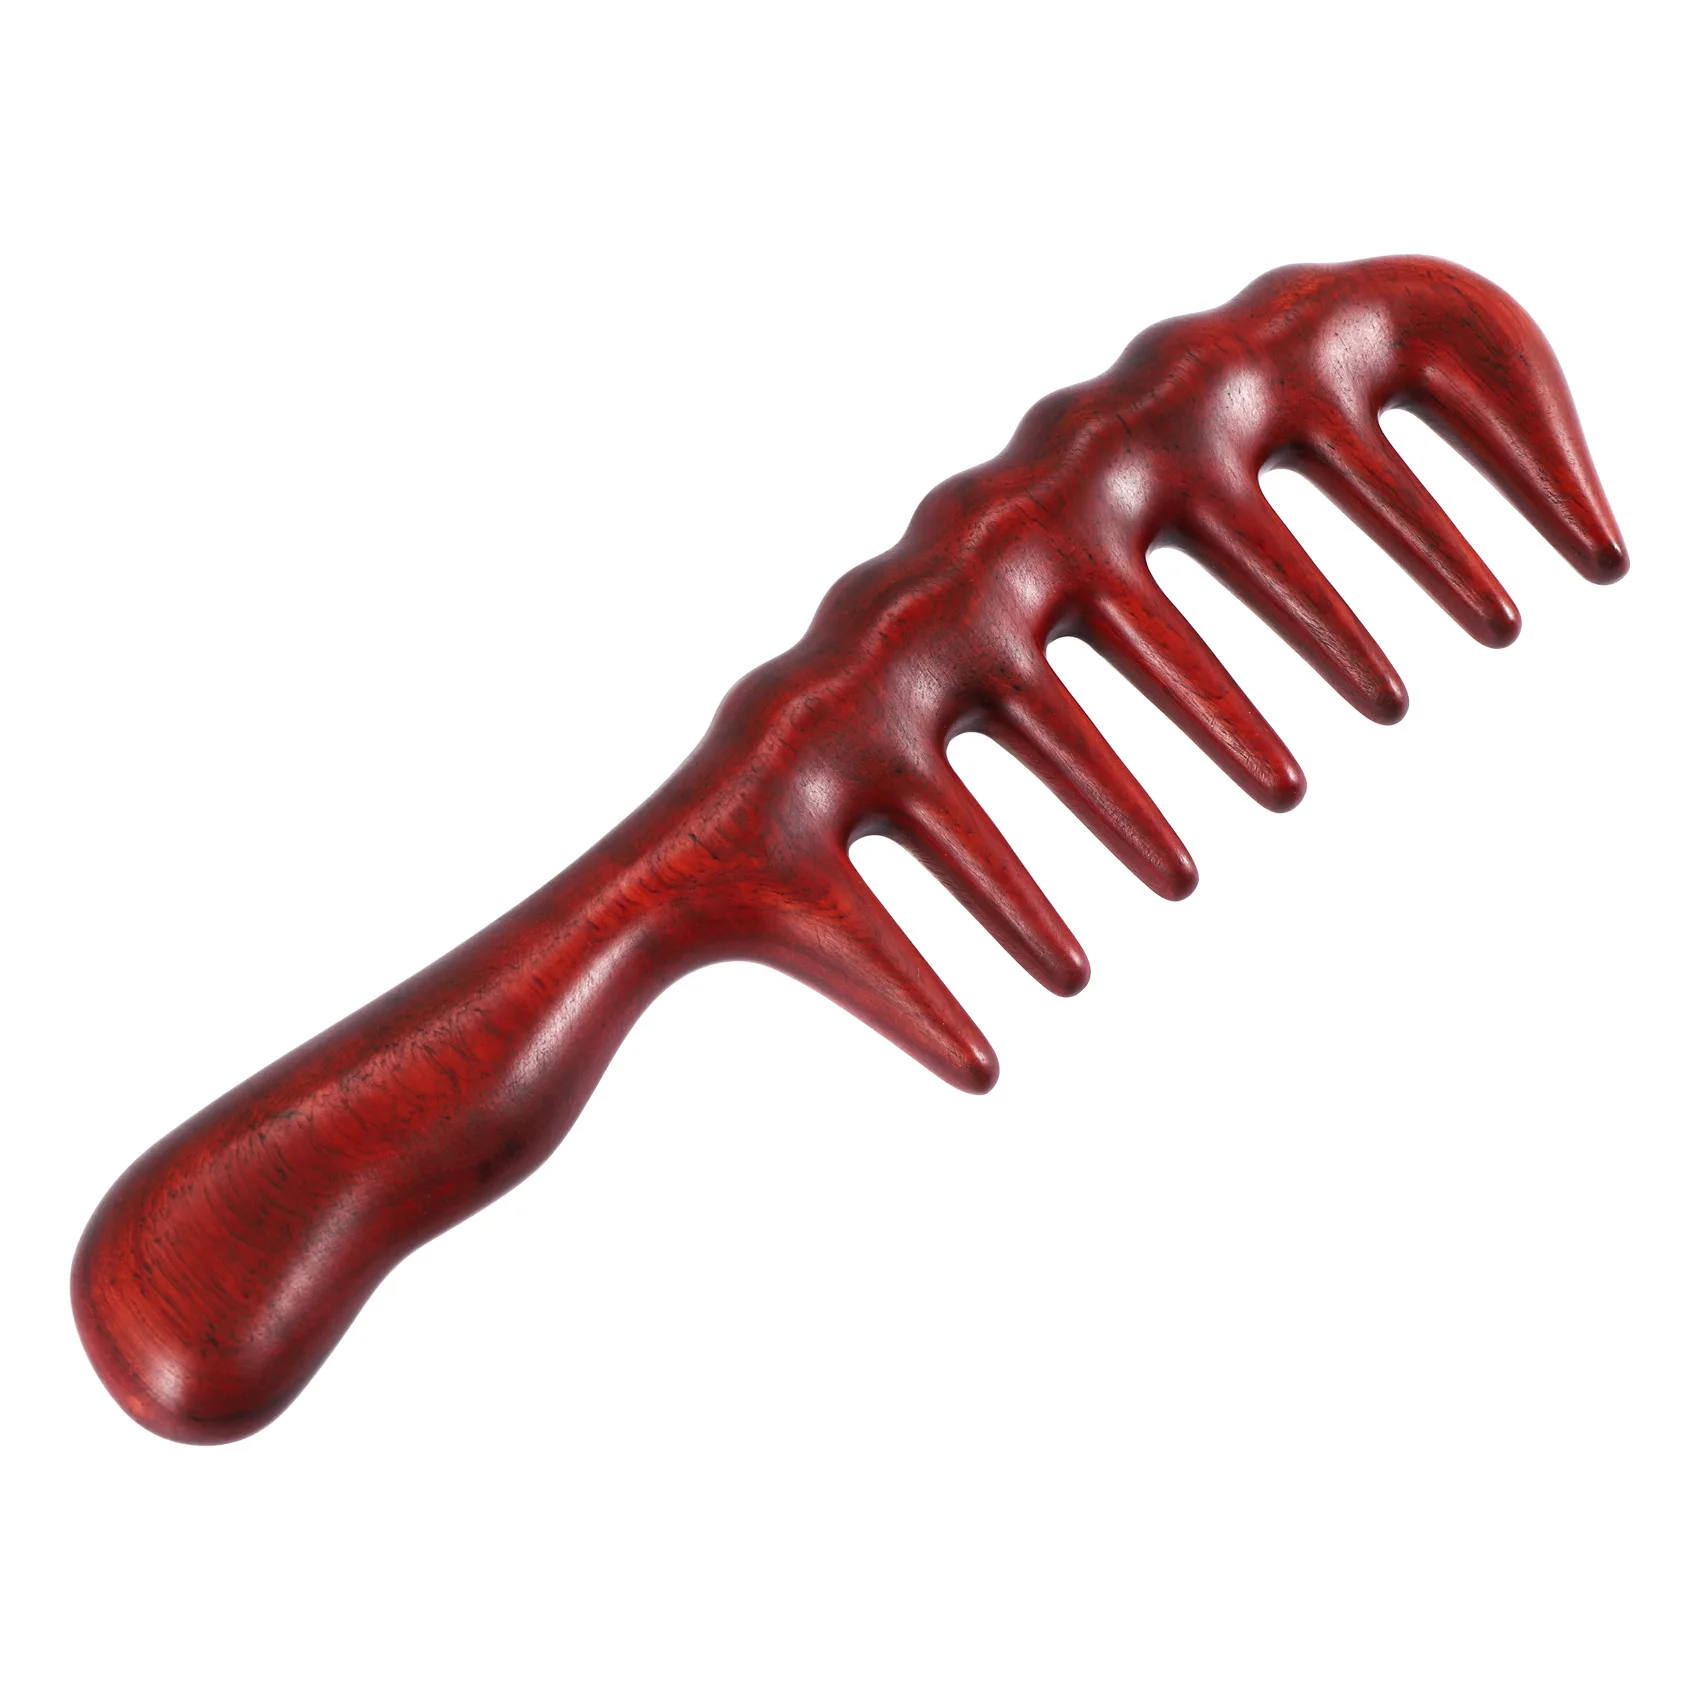 

Hair Comb for Detangling - Wide Tooth Wood Comb for Curly Hair - No Static Natural Wooden Sandalwood Comb